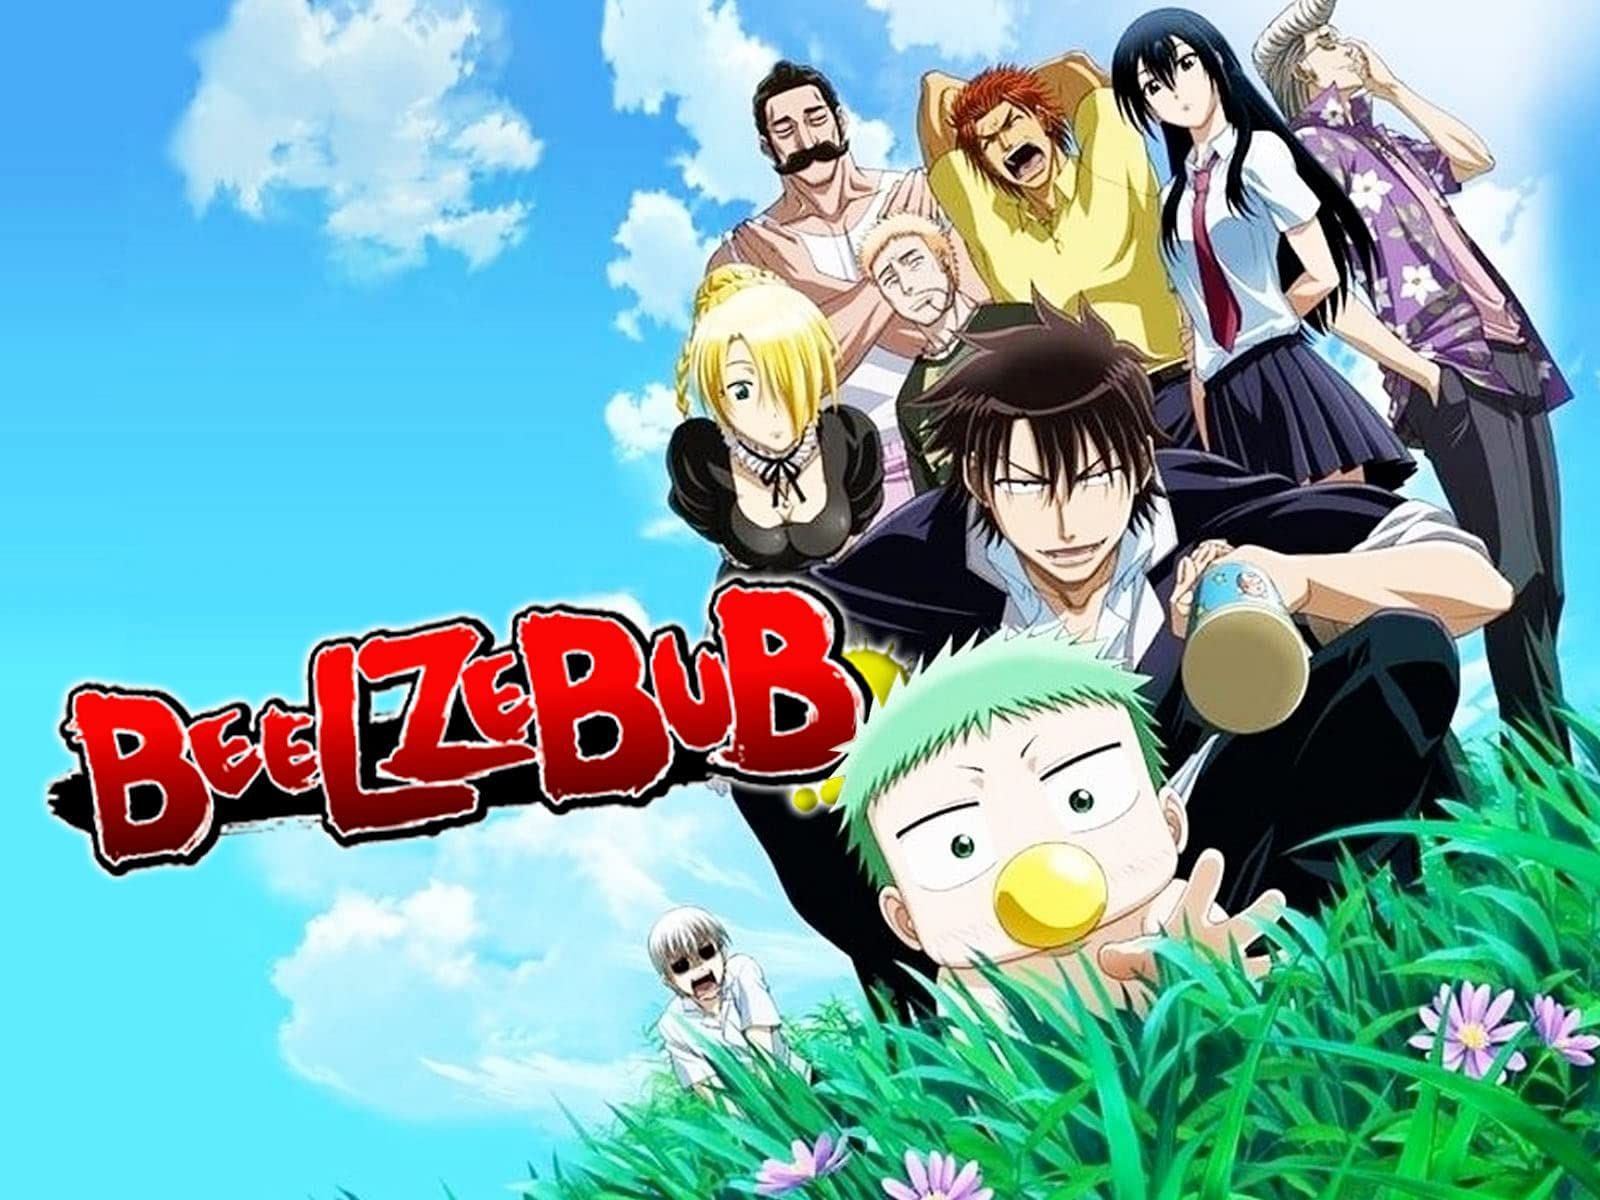 Bad Boys  14 Anime About Delinquents  Recommend Me Anime